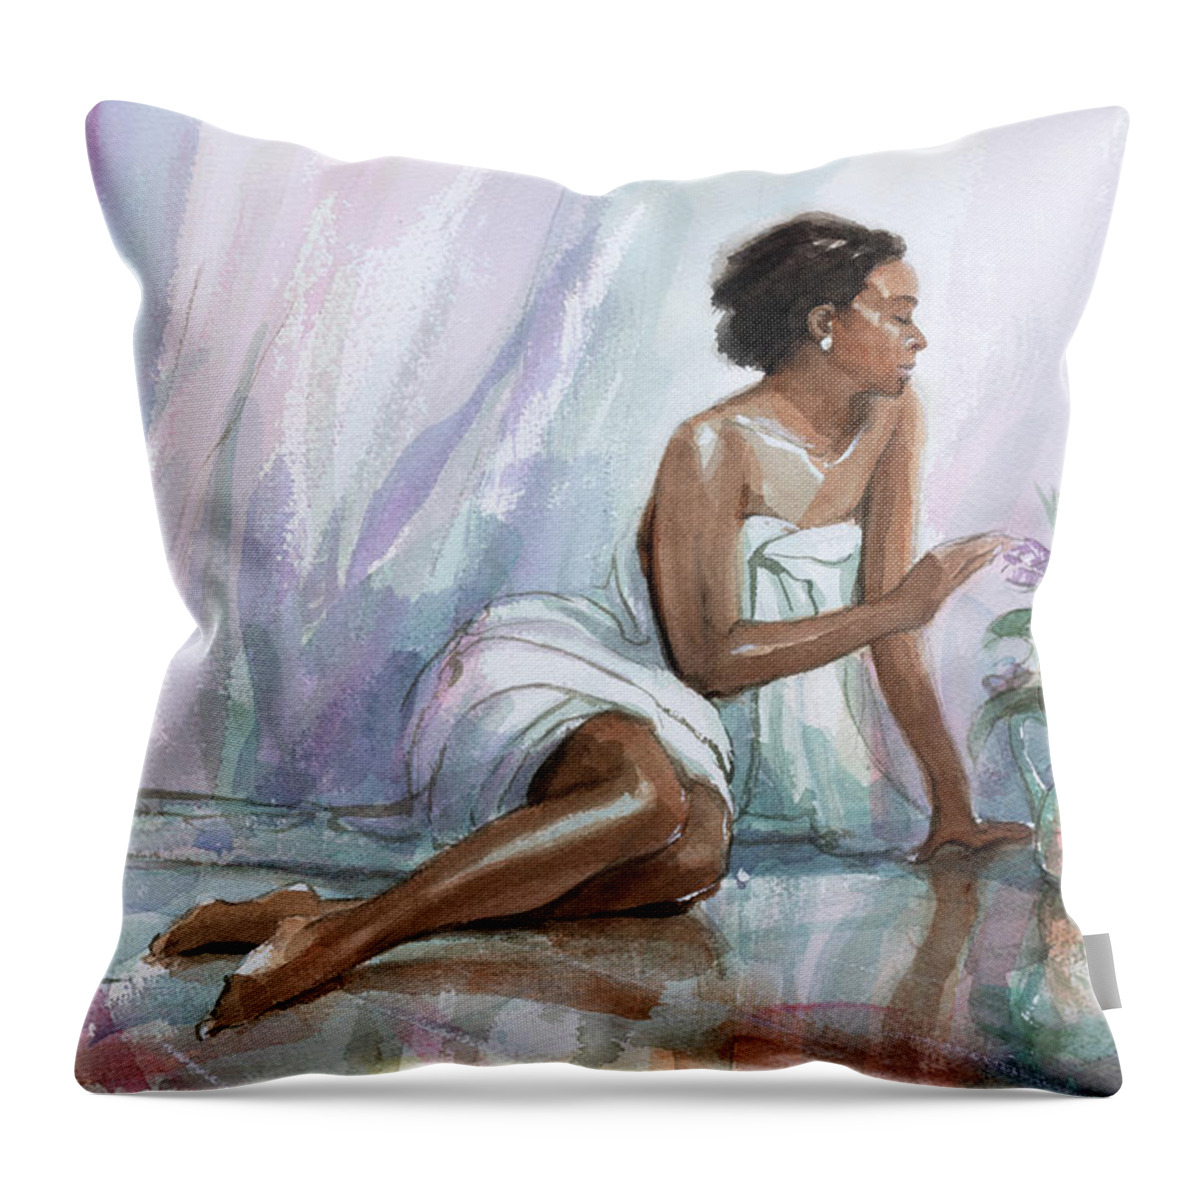 Woman Throw Pillow featuring the painting A Woman's Touch by Steve Henderson